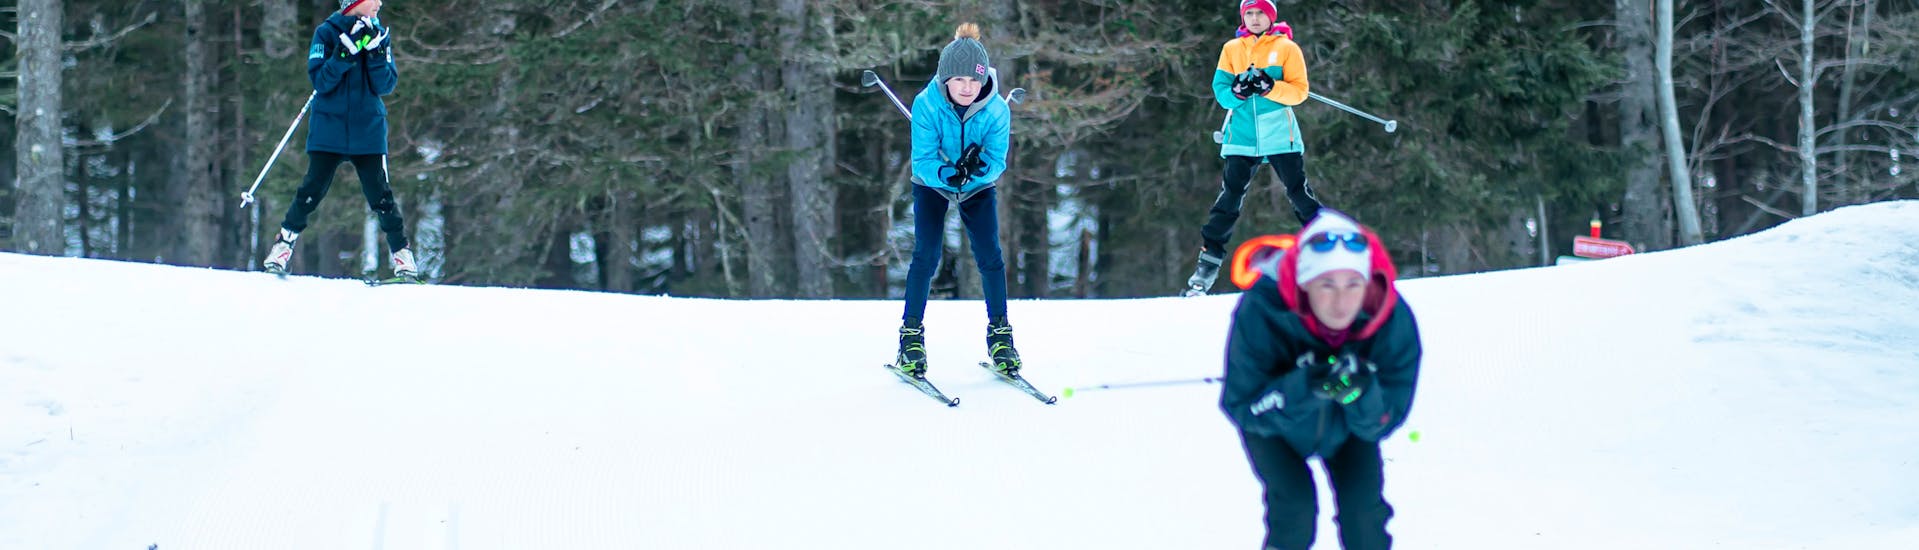 People going fast on a Private Cross Country Skiing Lessons for All Levels in Chamonix.